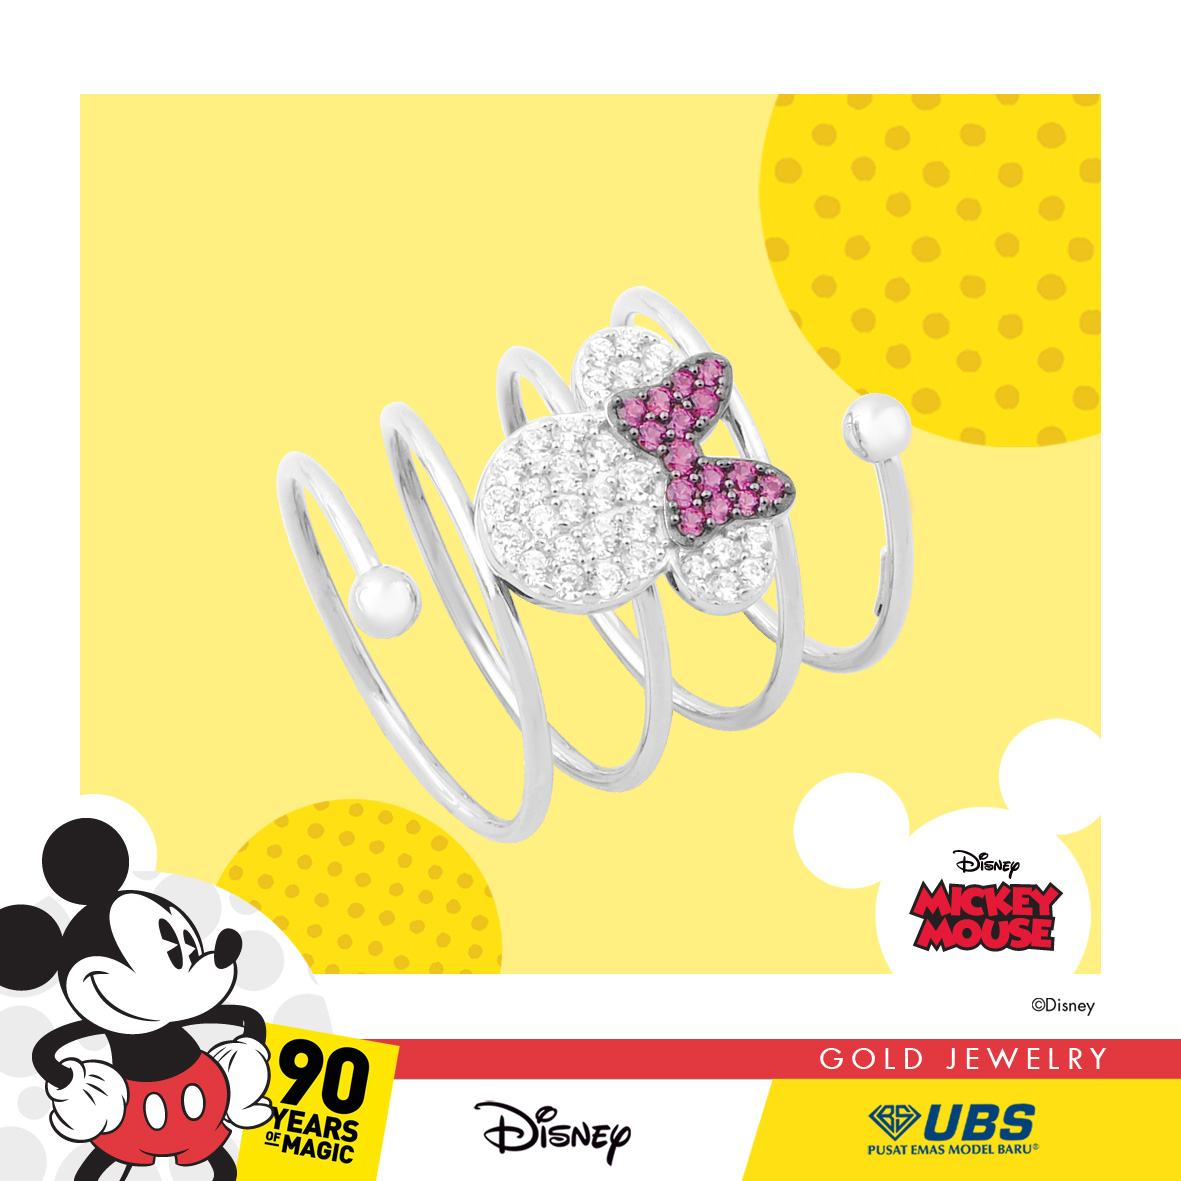 MINNIE MOUSE RING